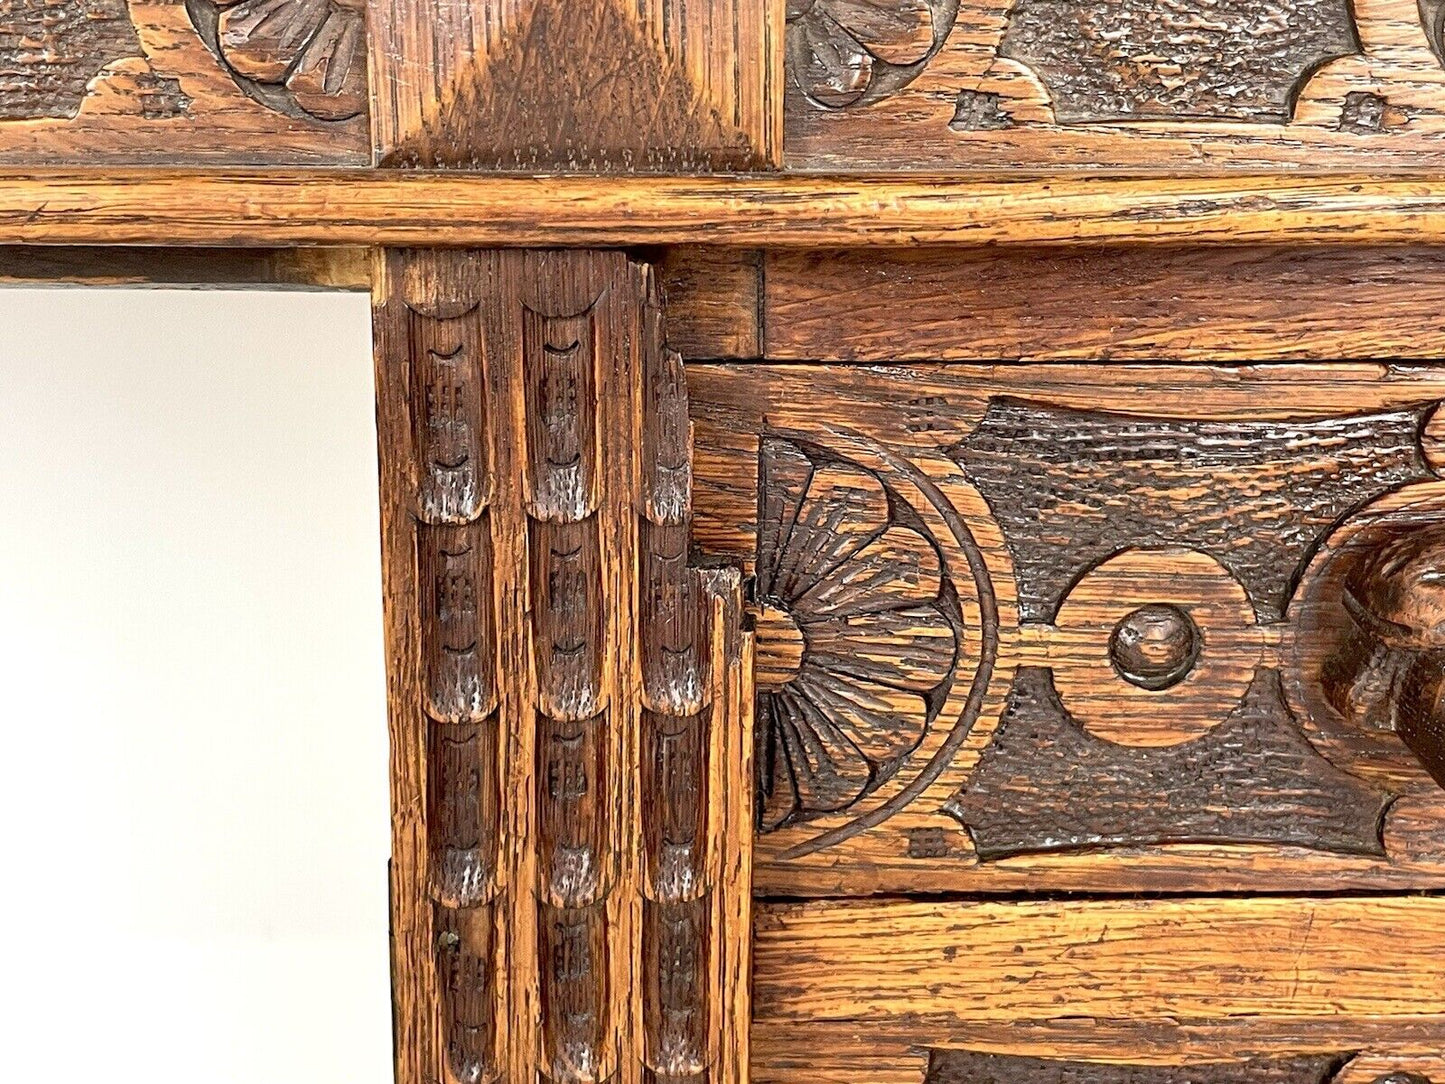 19th Century, Carved Flemish Style Double Pedestal Writing Desk